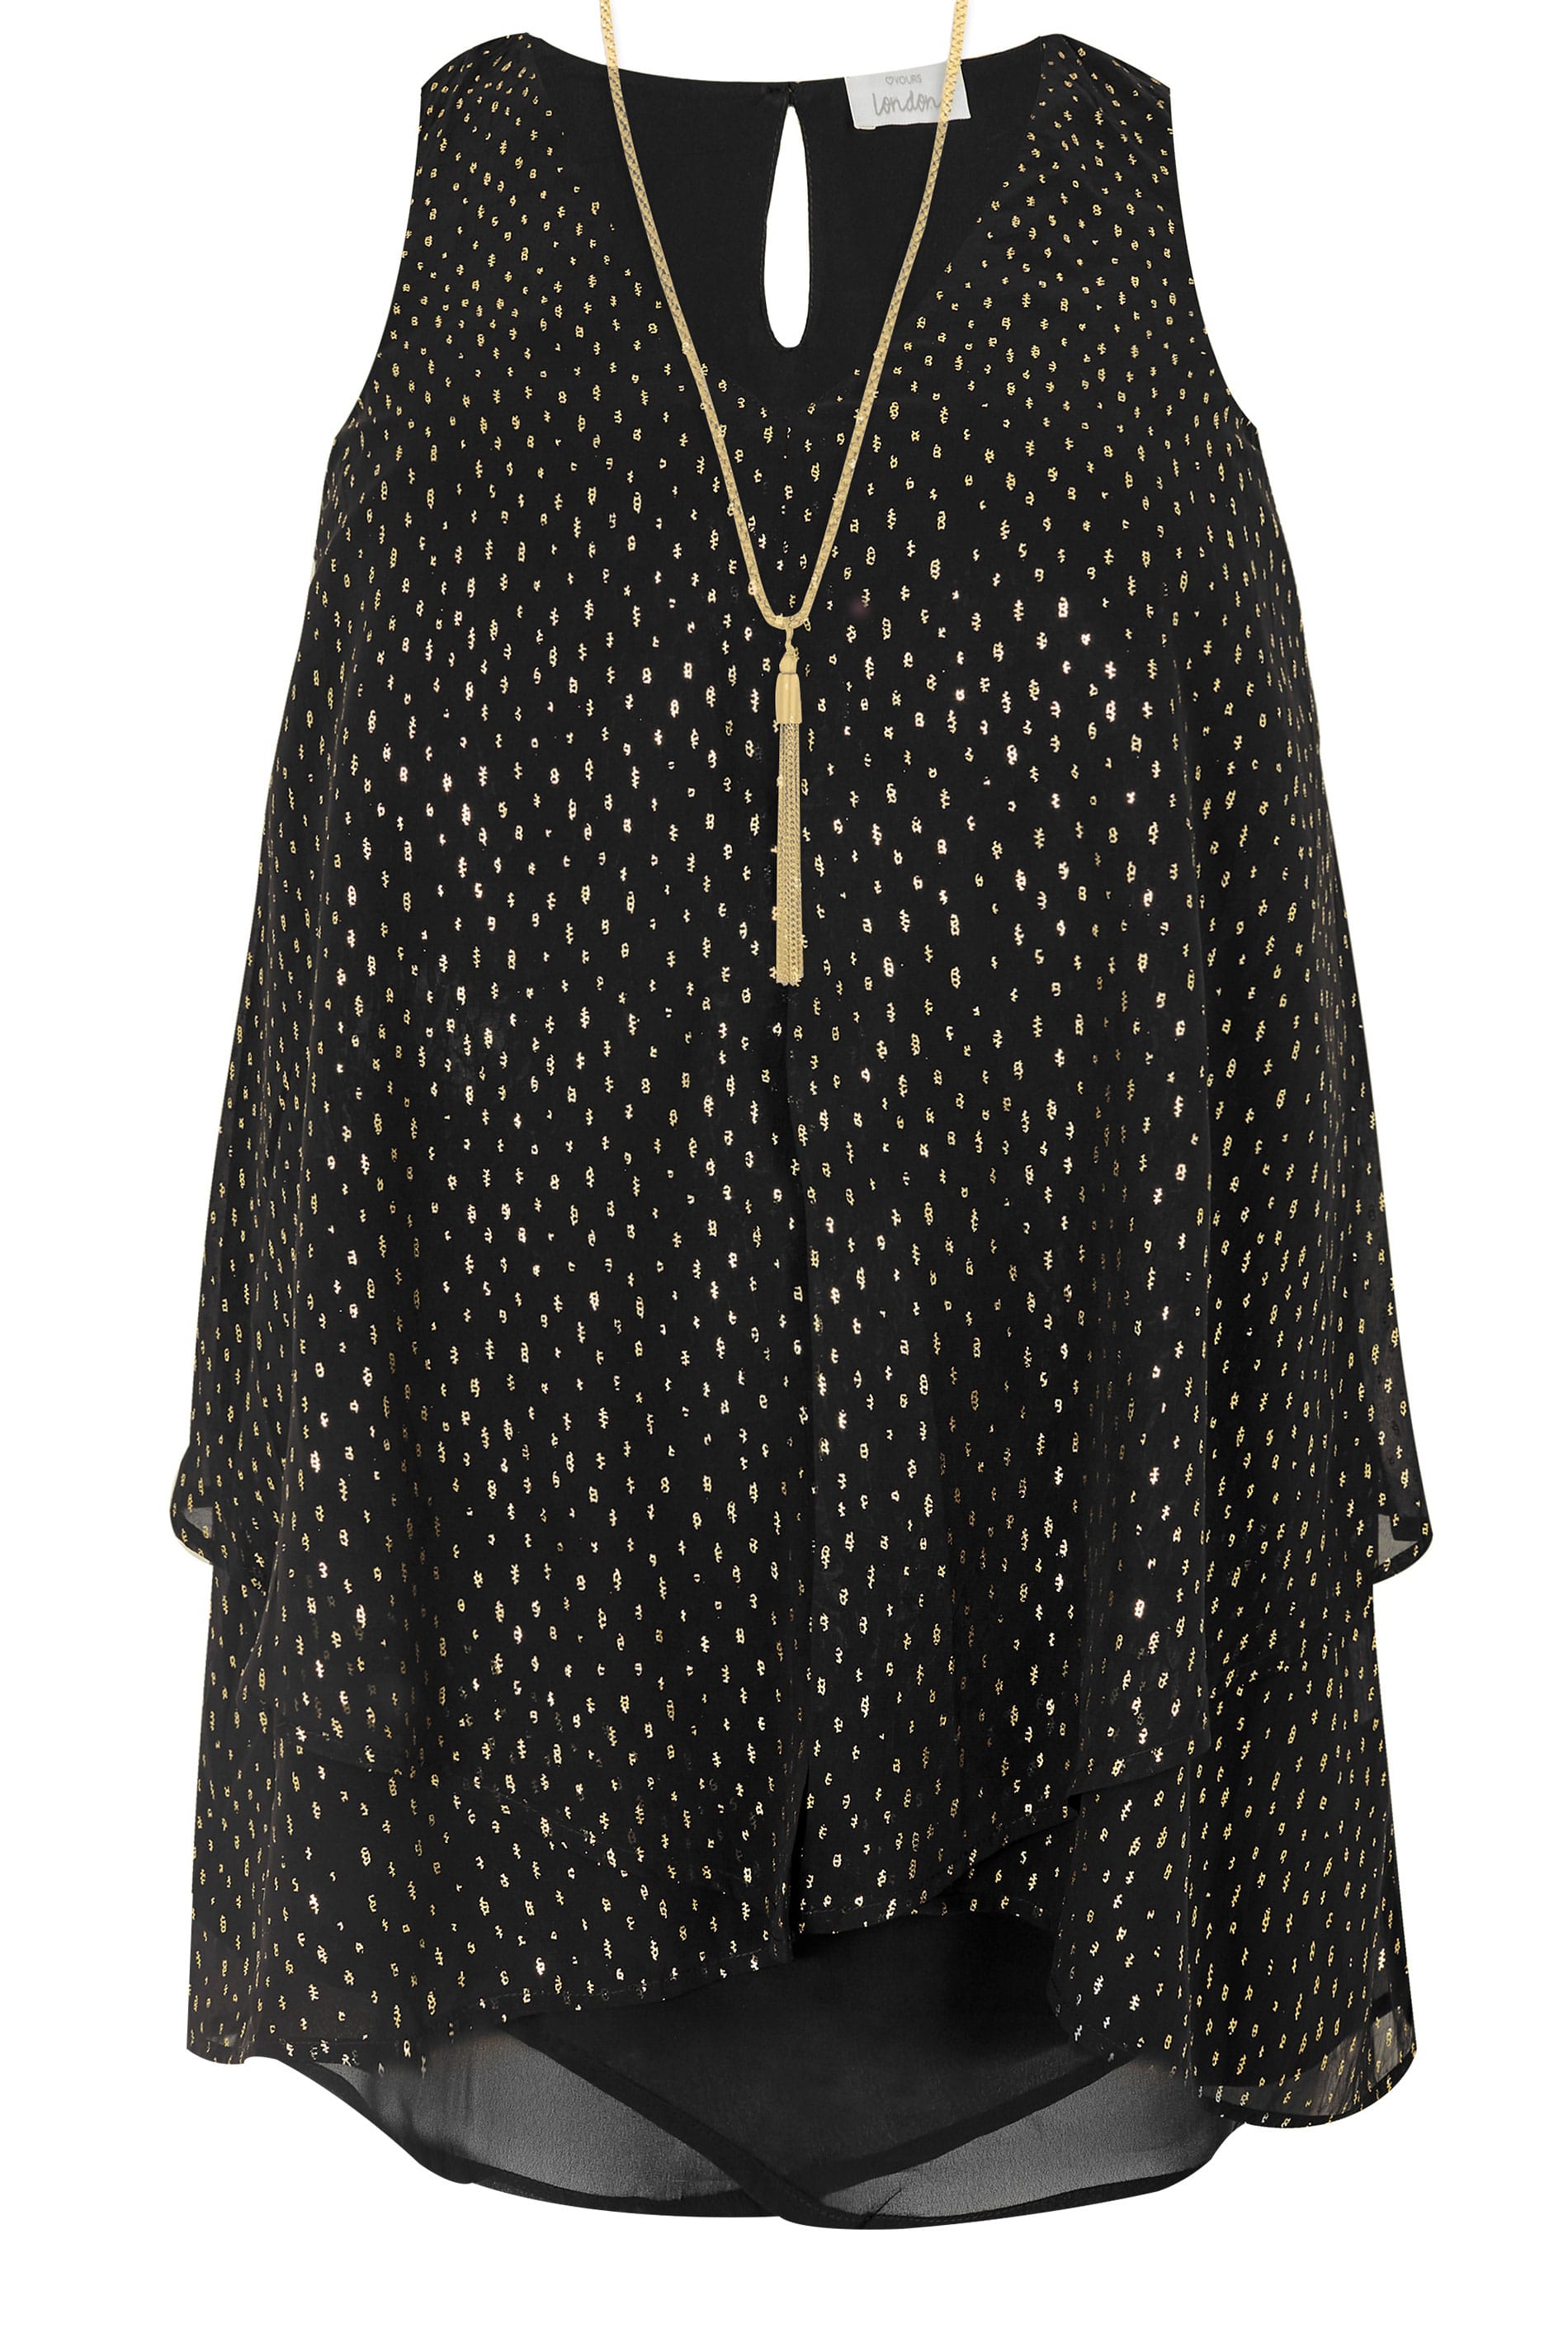 YOURS LONDON Black & Gold Layered Chiffon Top, plus size 16 to 36